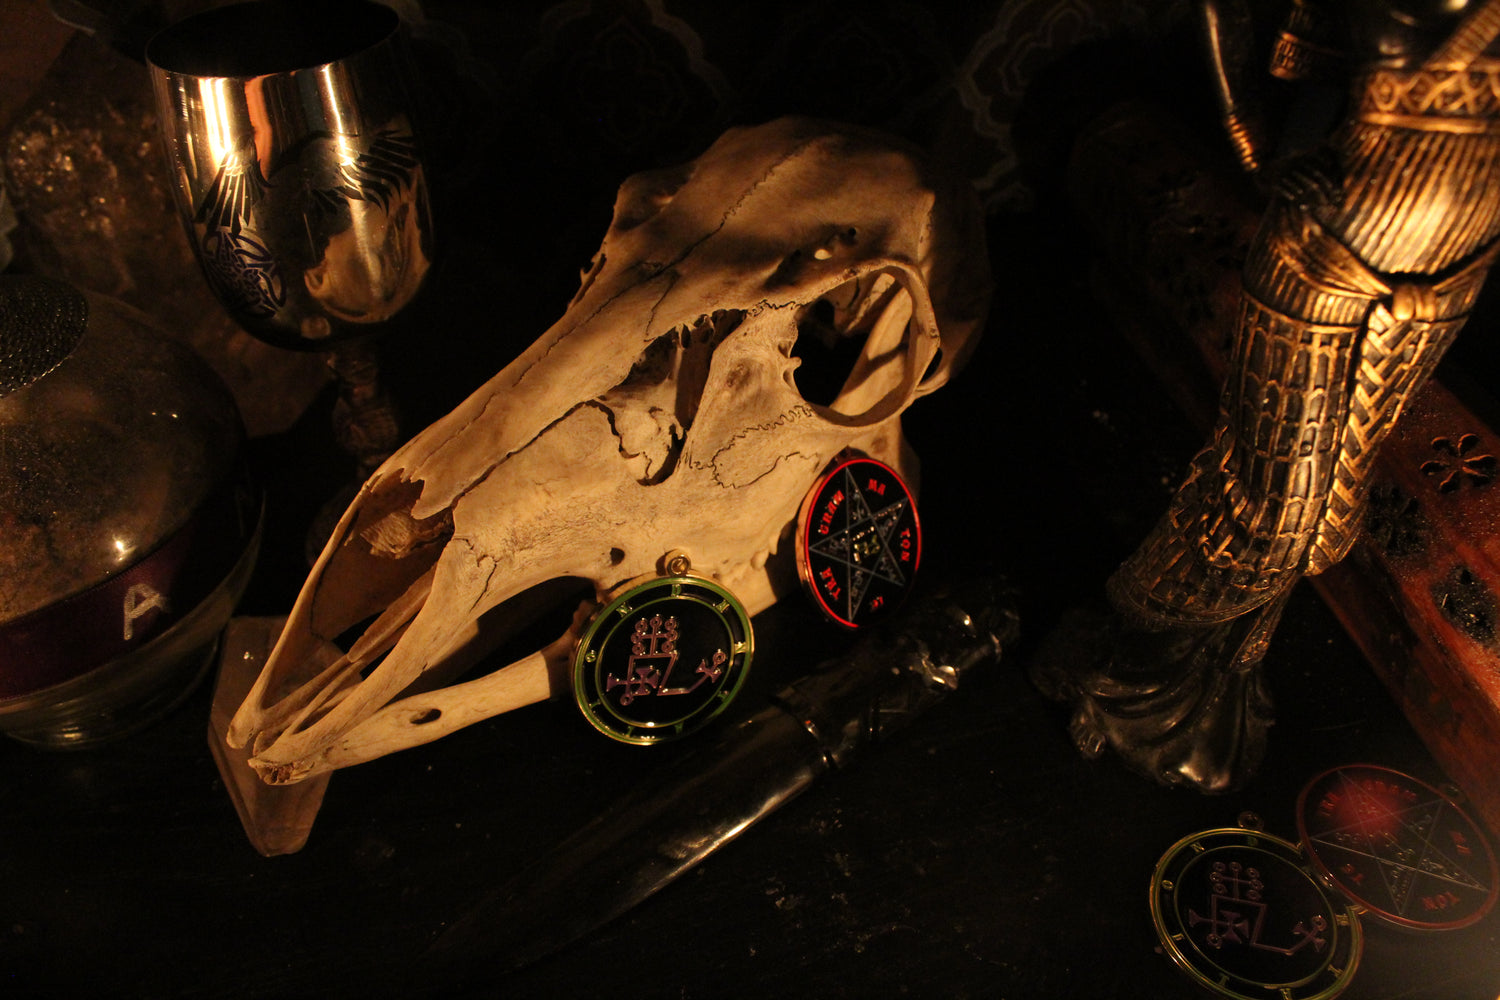 Altar setup with various ritual tools. Goetic seals of Dantalion and the Pentacle of Solomon are propped up on a deer skull.